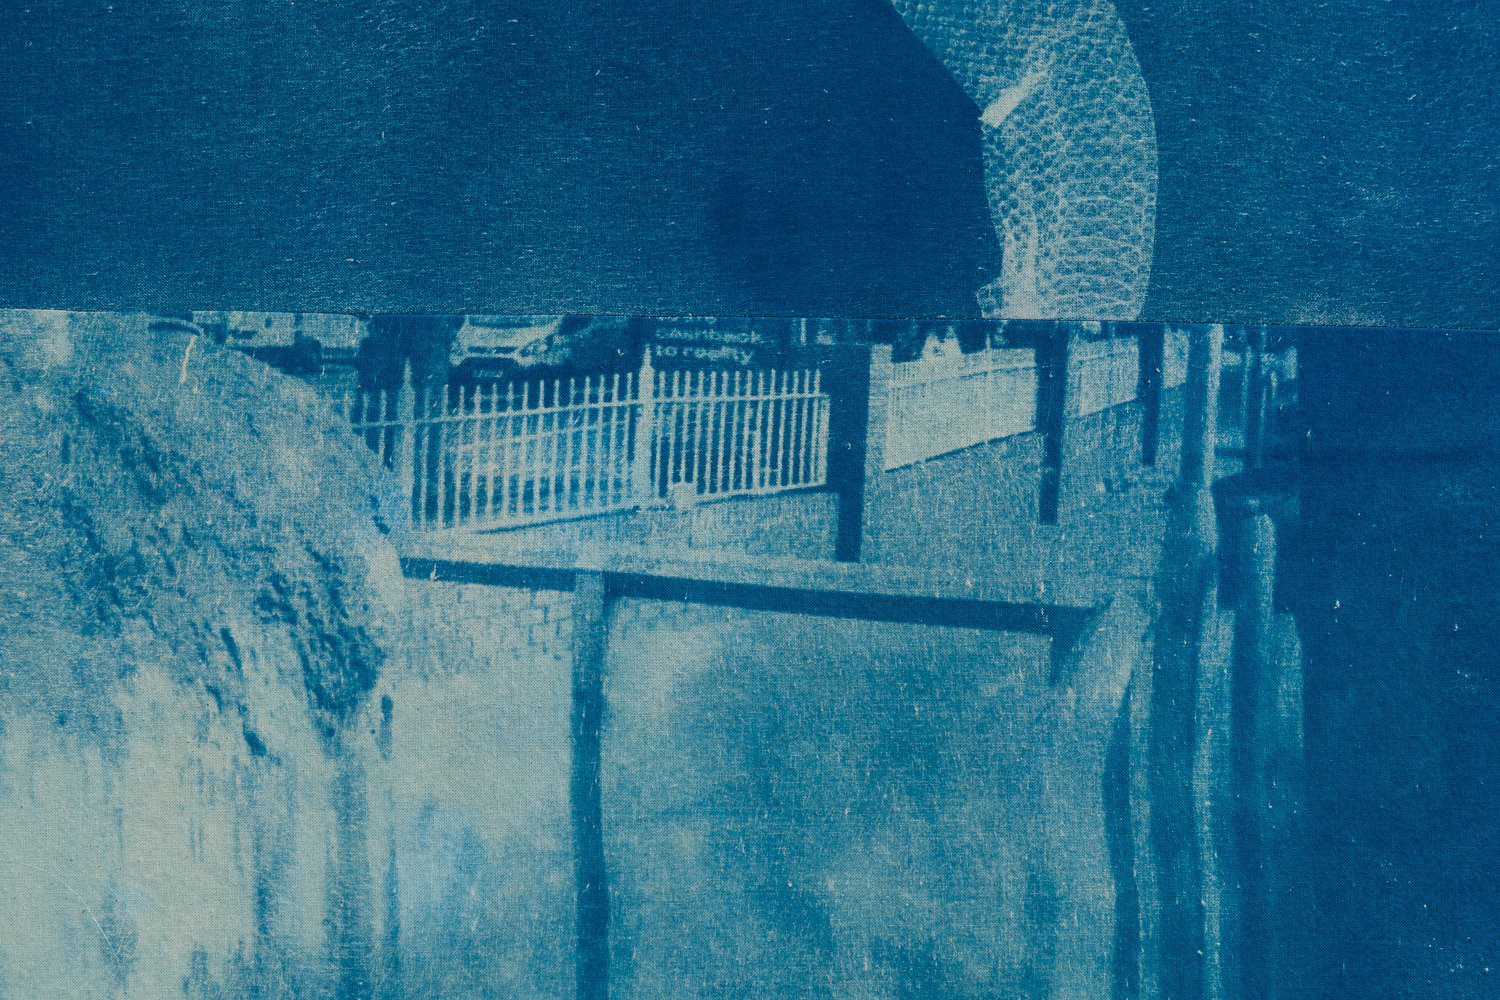 Felix Melia, Detail  'Back to Reality', from 'Stages', 2022, cyanotype print on cotton